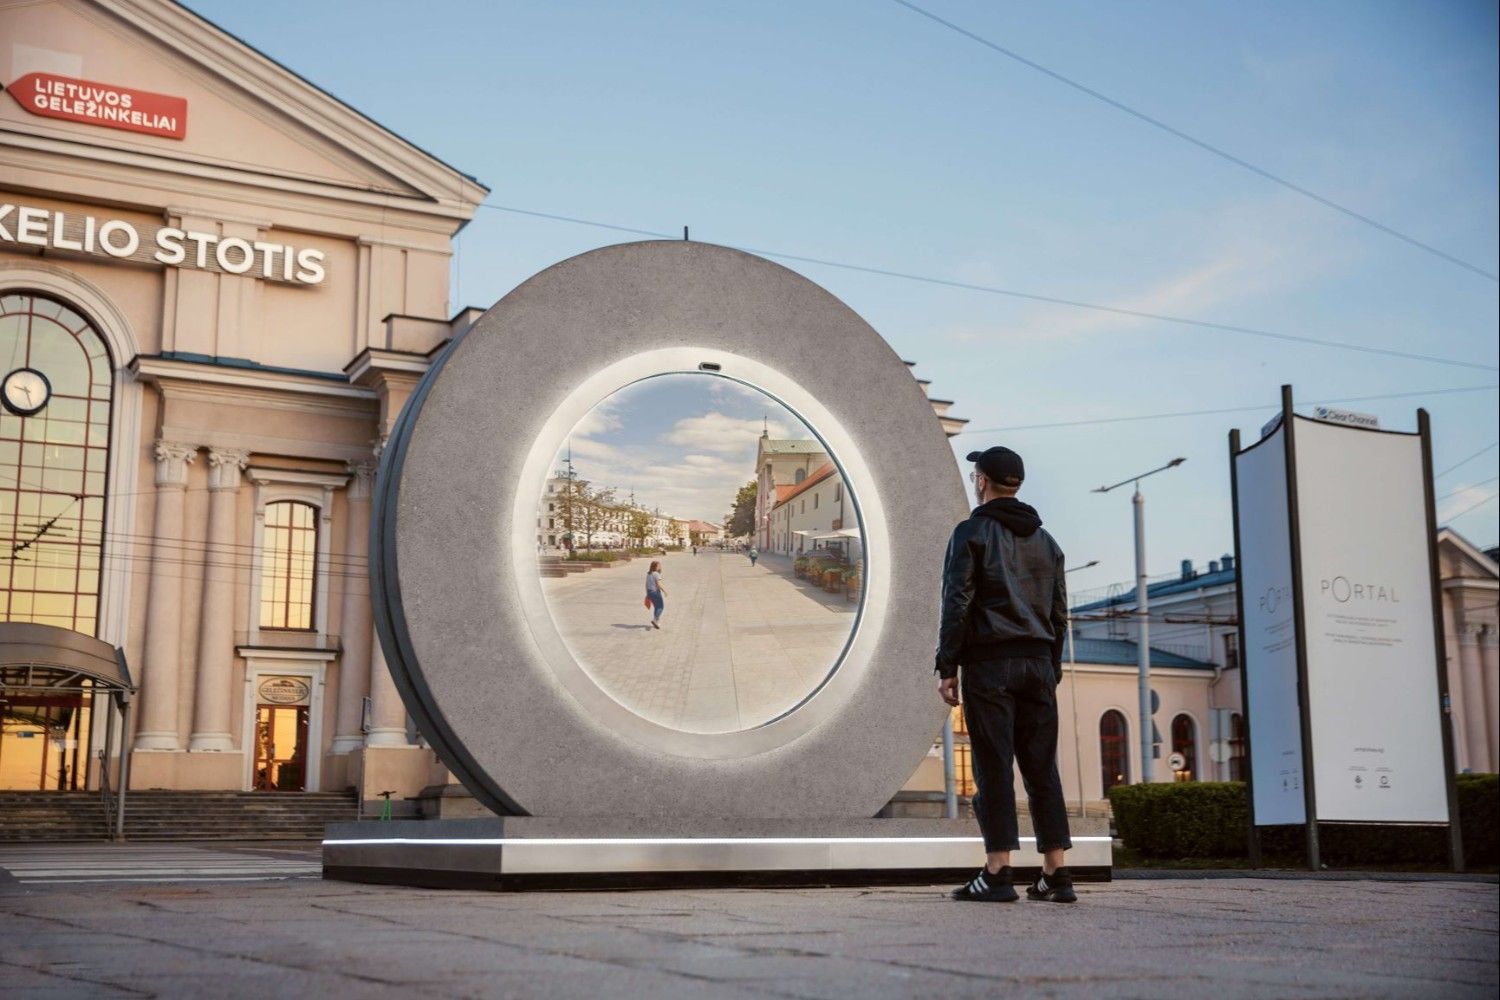 Stargate-like portal built in Lithuania and Poland